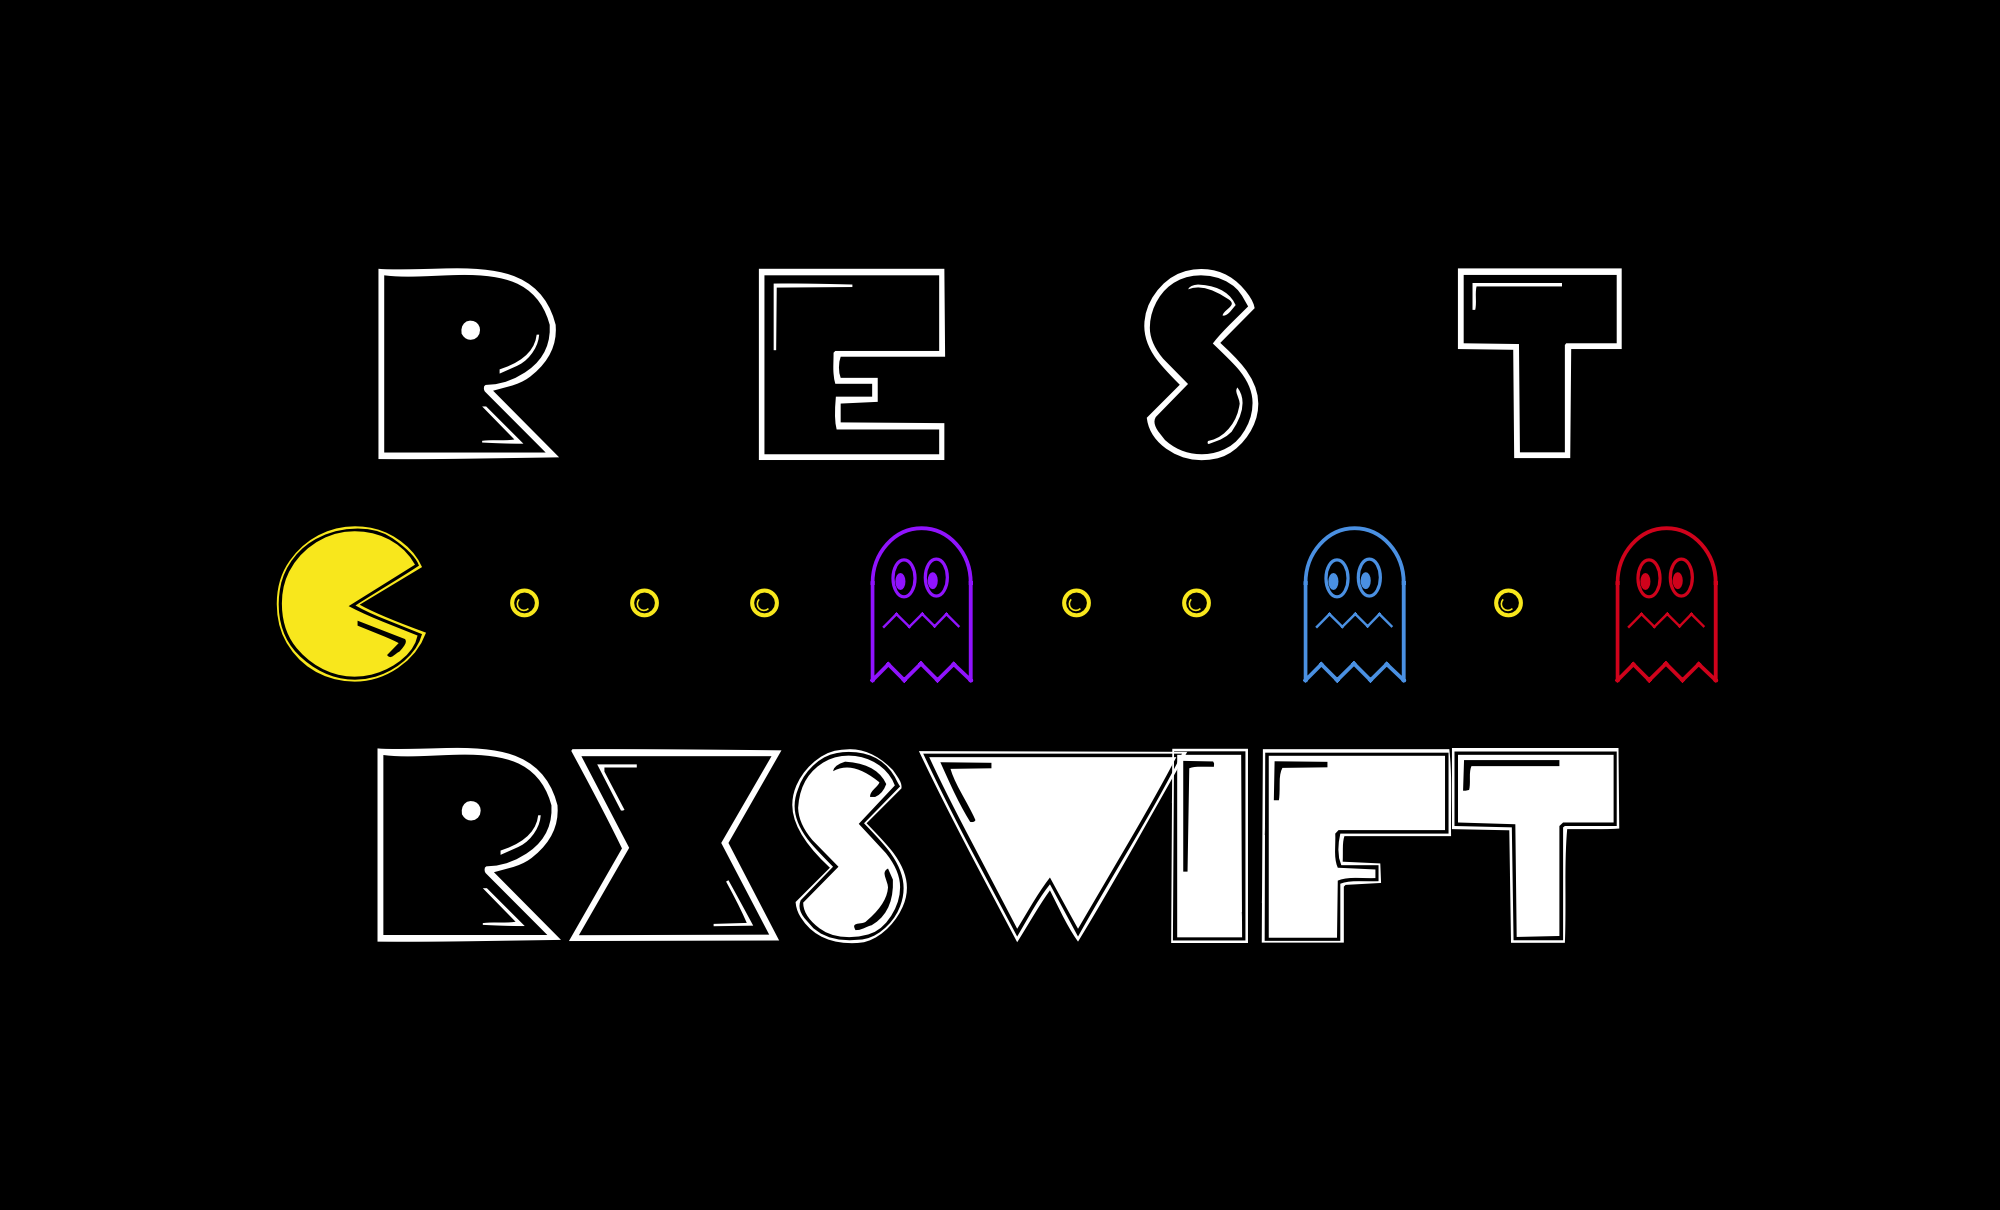 Handling REST errors with RxSwift and RxAlamofire